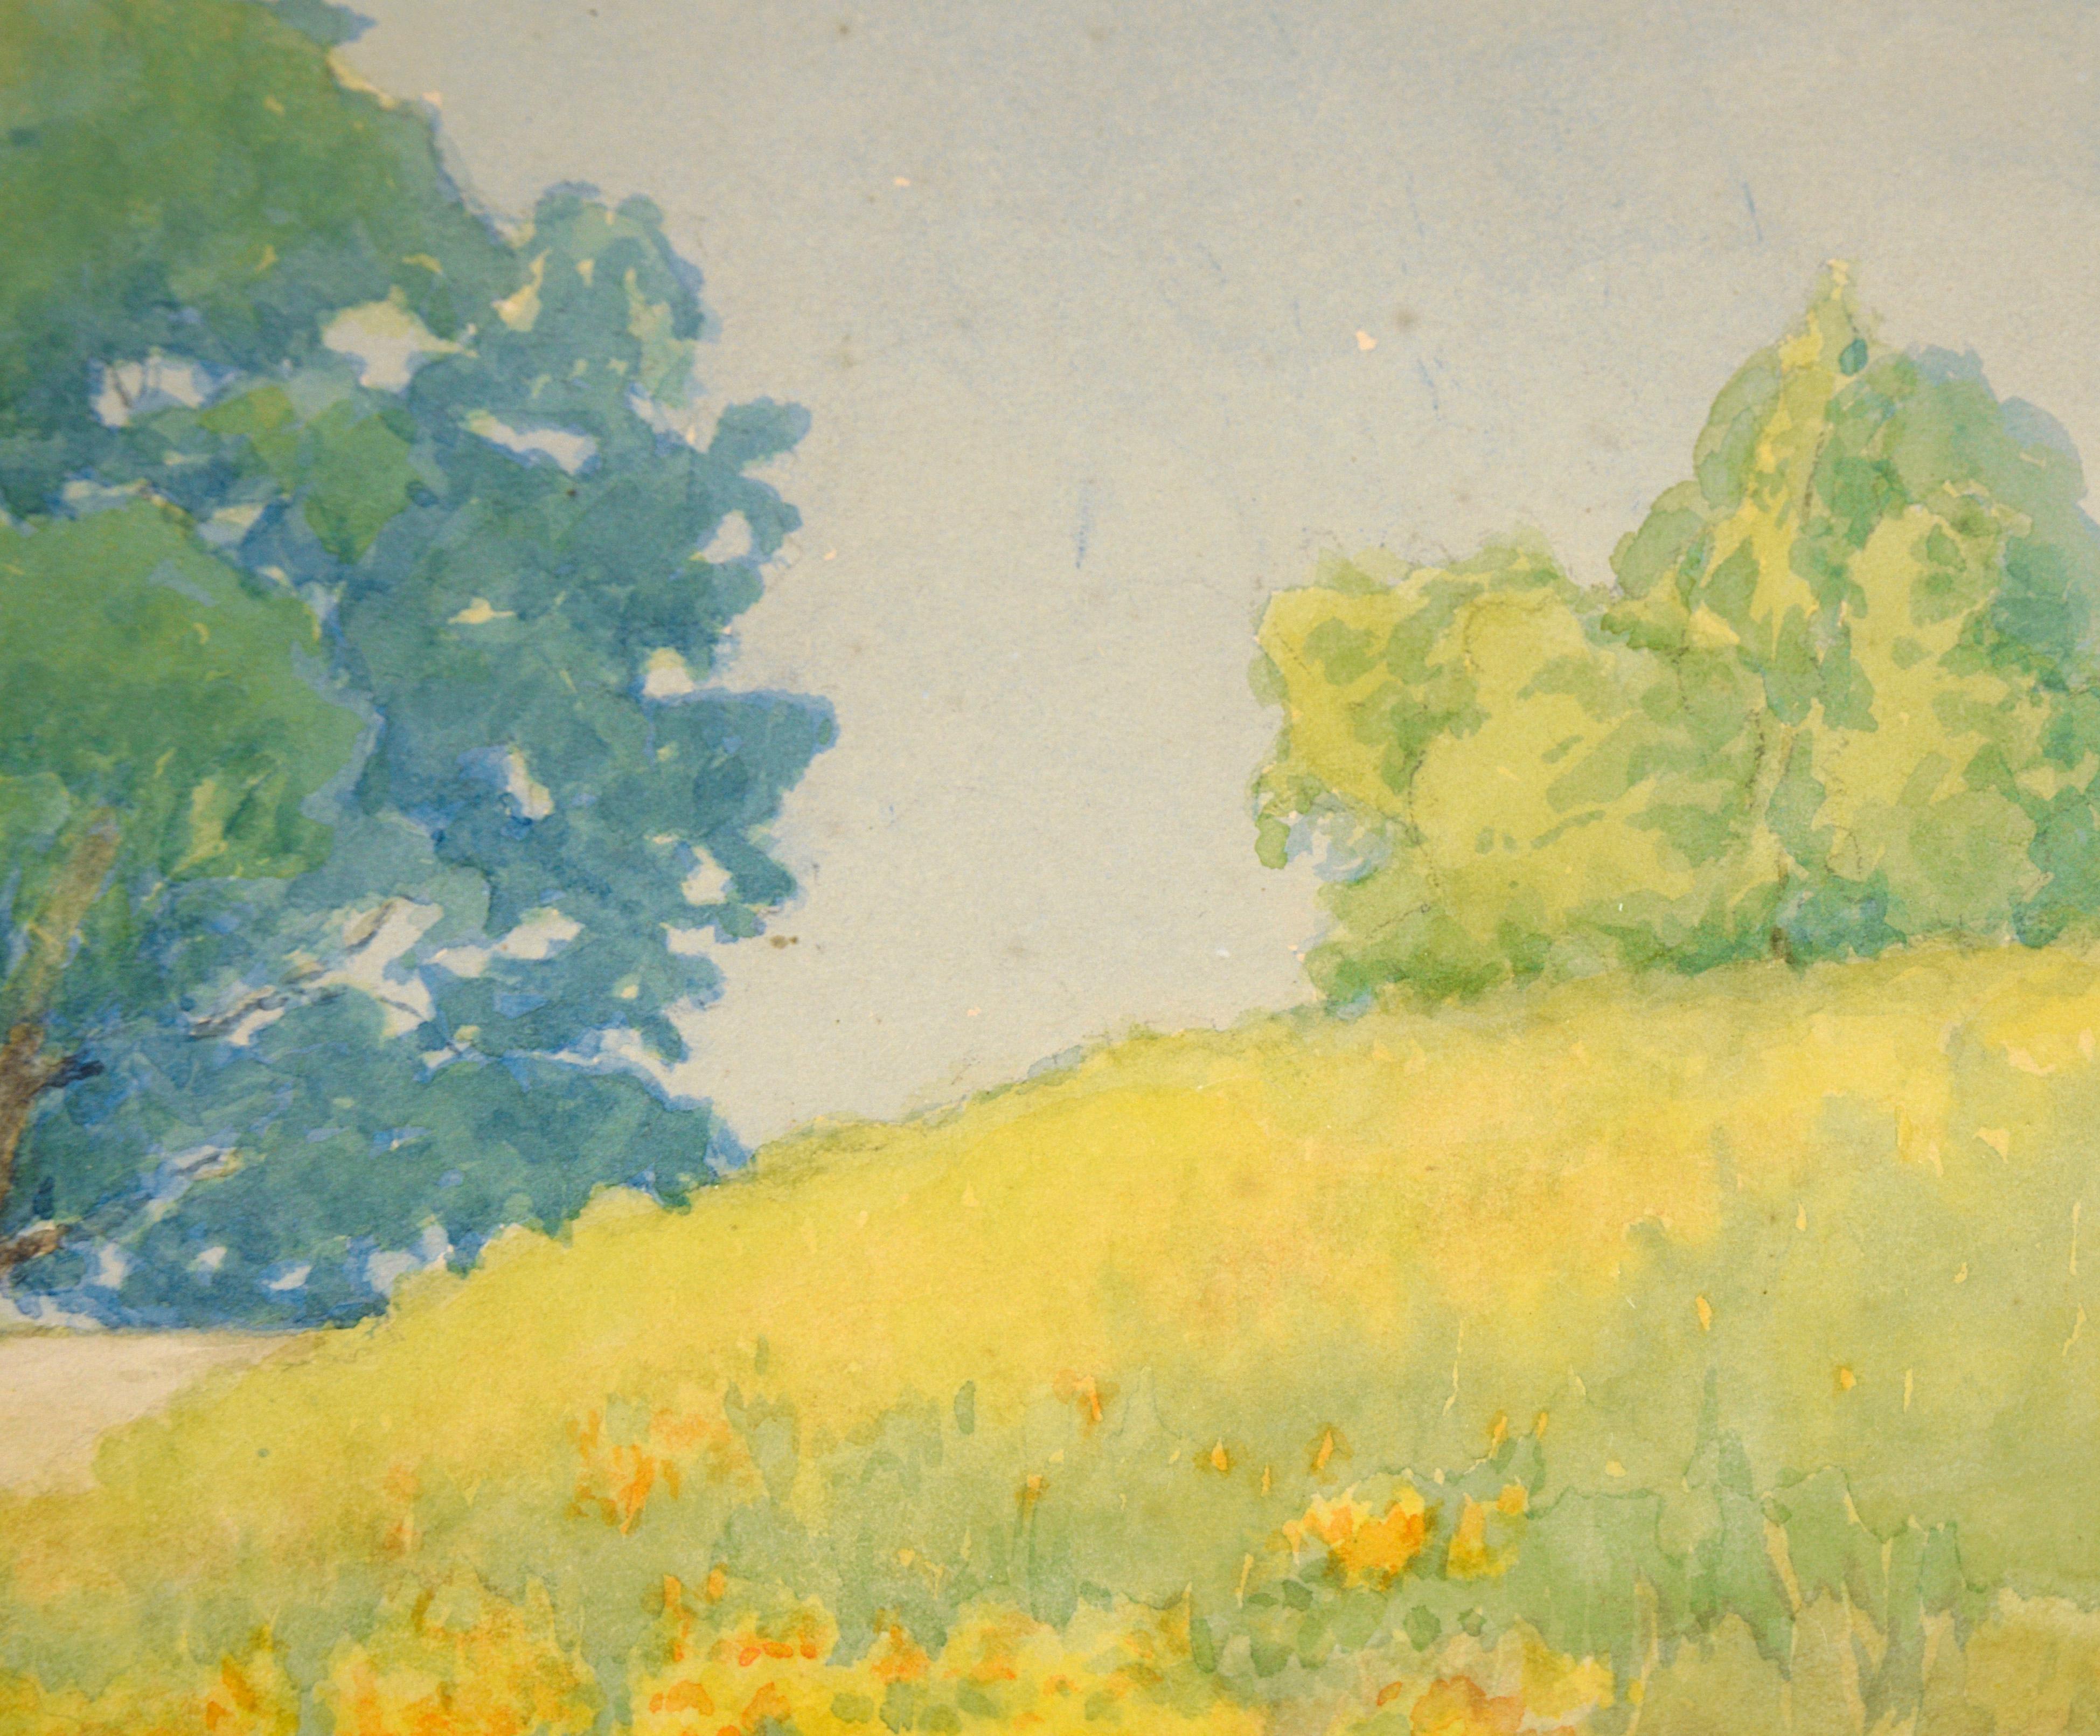 California Golden Poppies and Blue Oaks - Rural Landscape in Watercolor on Paper For Sale 1